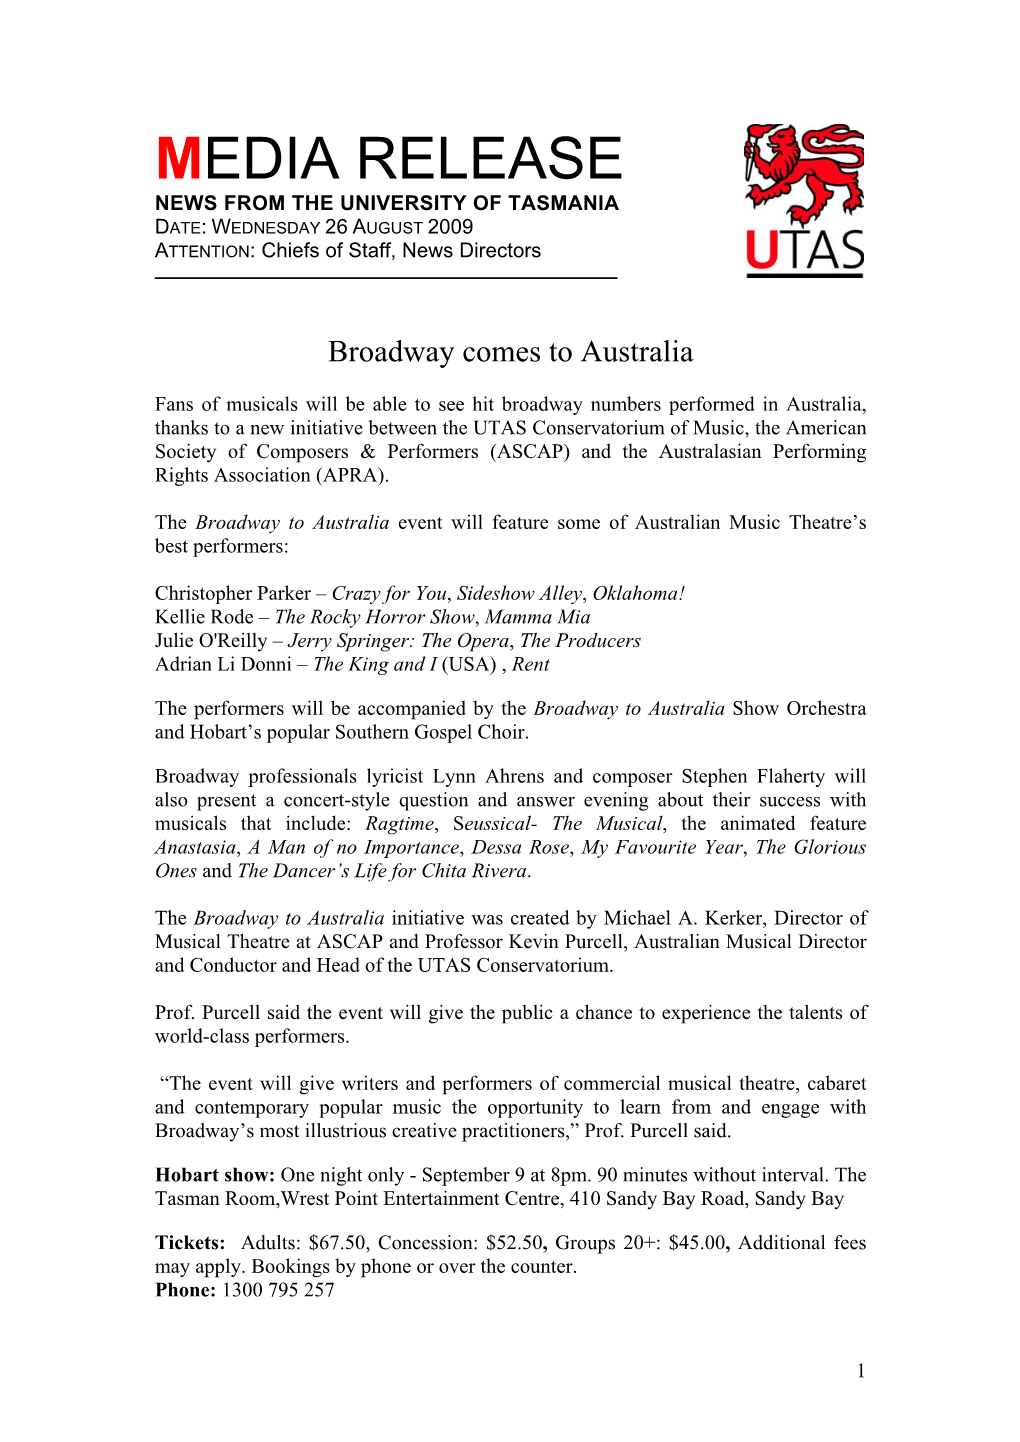 MEDIA RELEASE NEWS from the UNIVERSITY of TASMANIA DATE: WEDNESDAY 26 AUGUST 2009 ATTENTION: Chiefs of Staff, News Directors